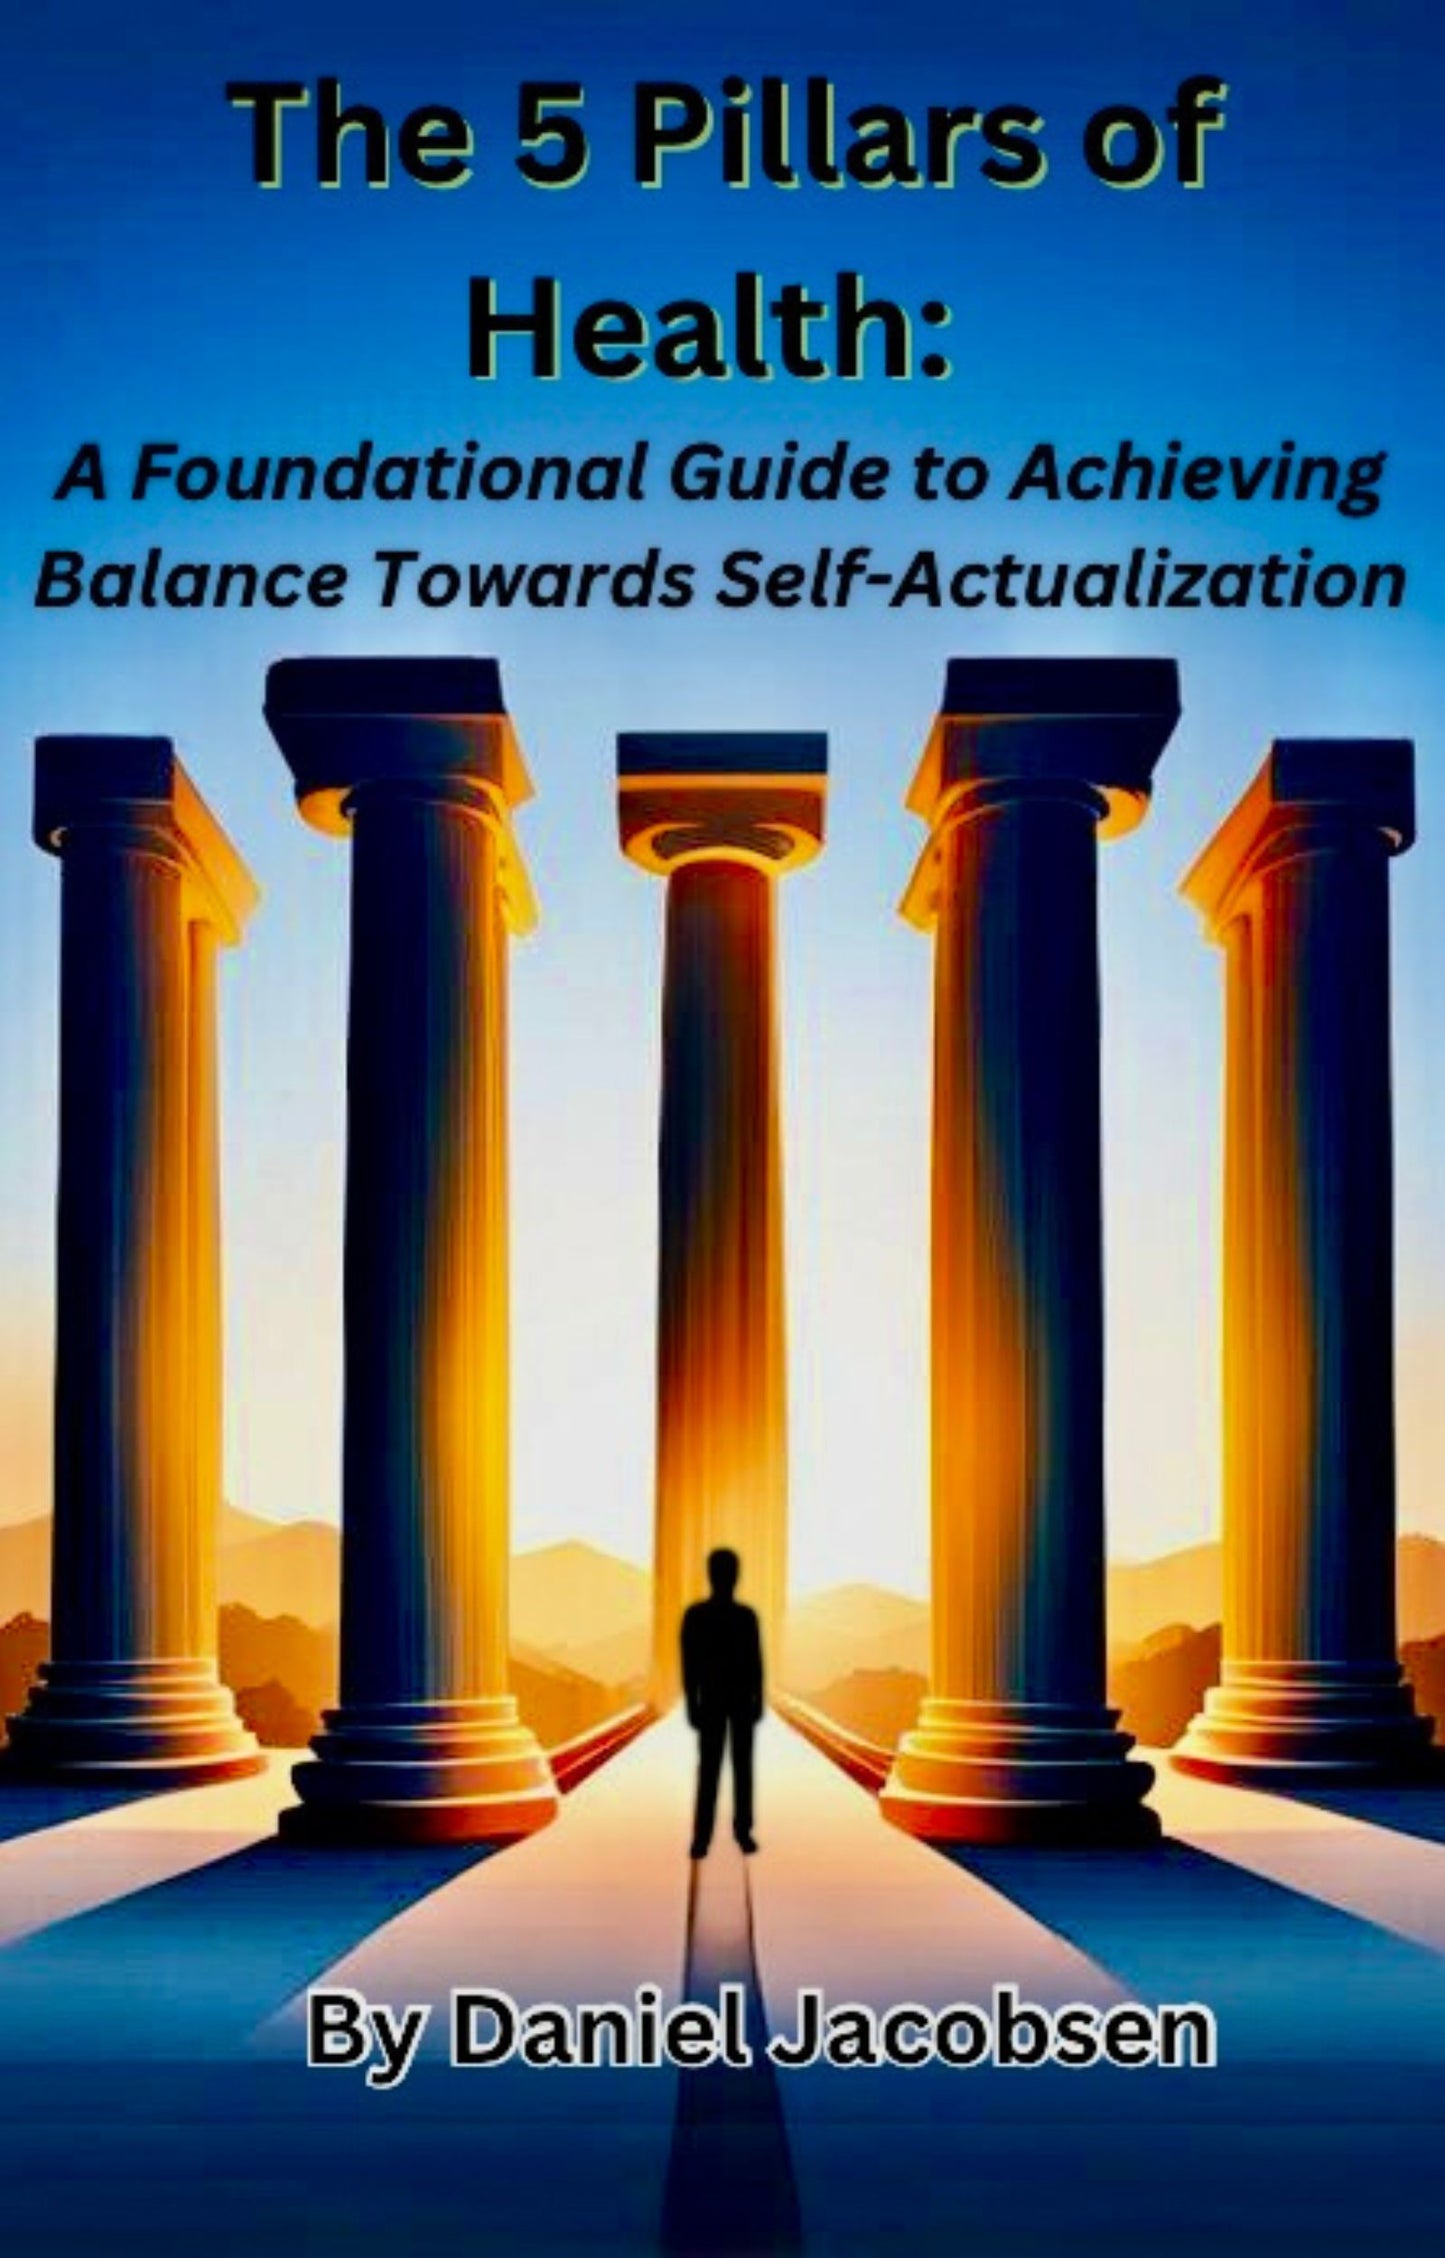 5 Pillars of Health: A Foundational Guide to Achieving Balance Towards Self-Actualization